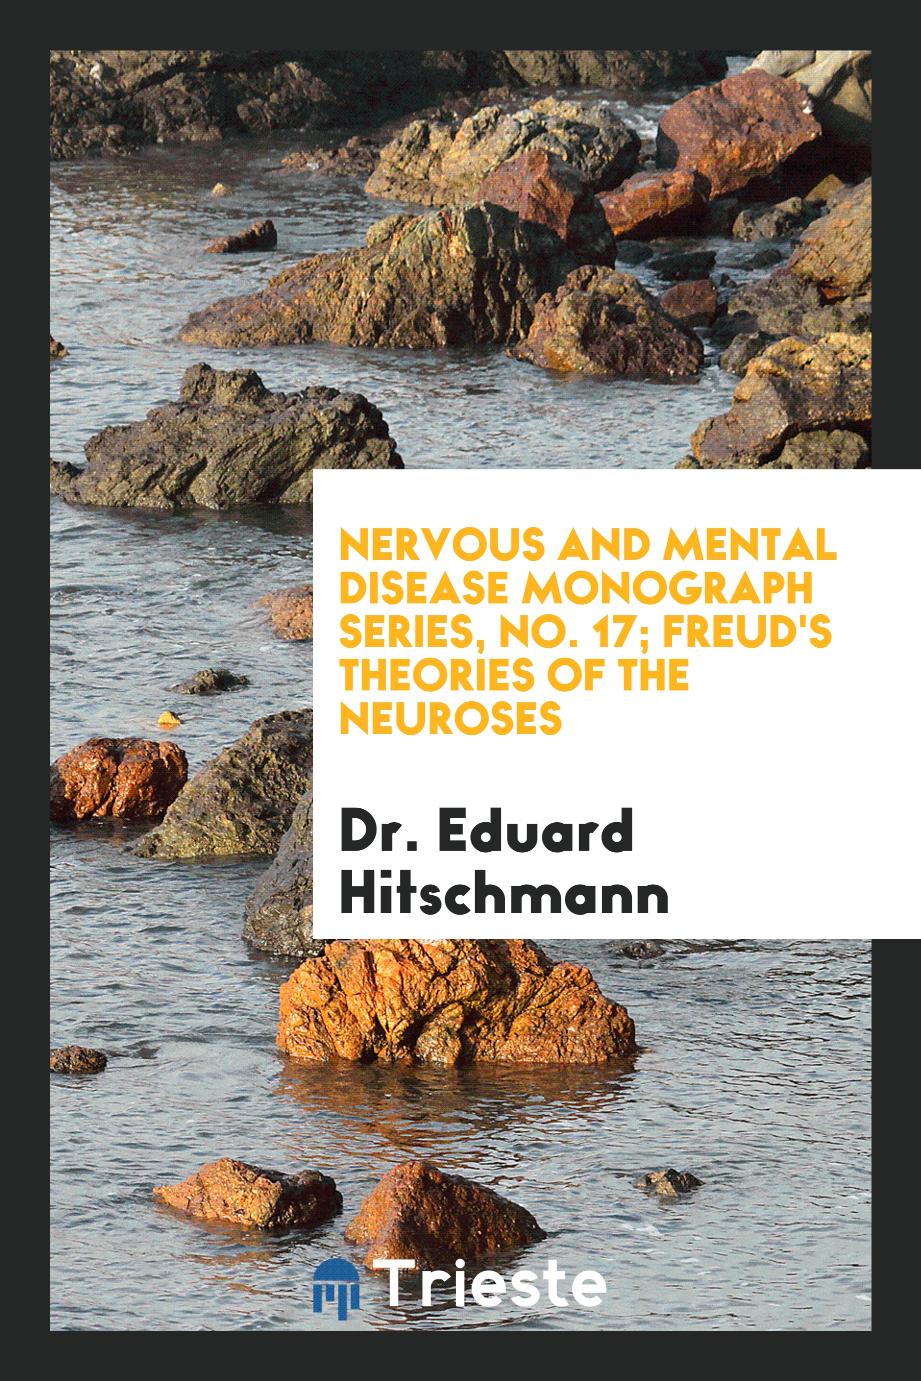 Nervous and Mental Disease Monograph Series, No. 17; Freud's Theories of the Neuroses